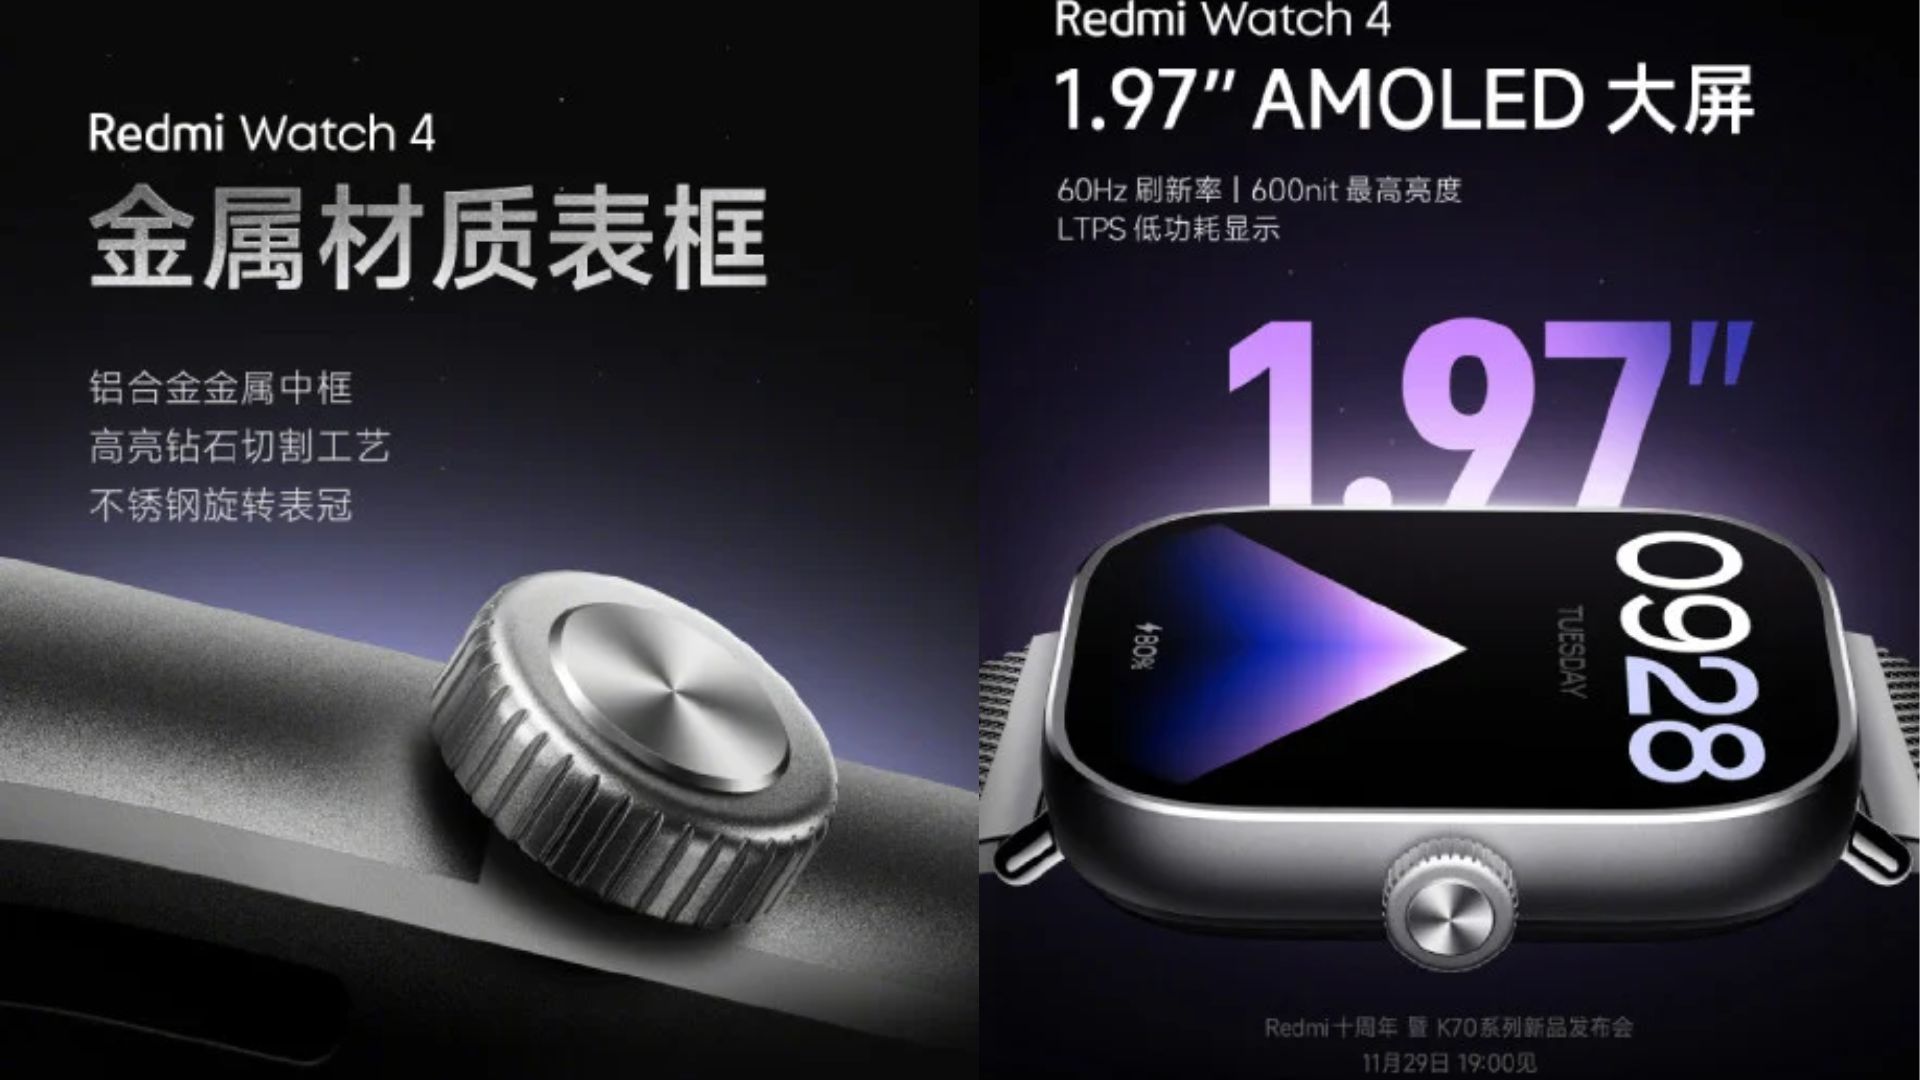 Xiaomi teases Redmi Watch 4 with AMOLED display, aluminum alloy build